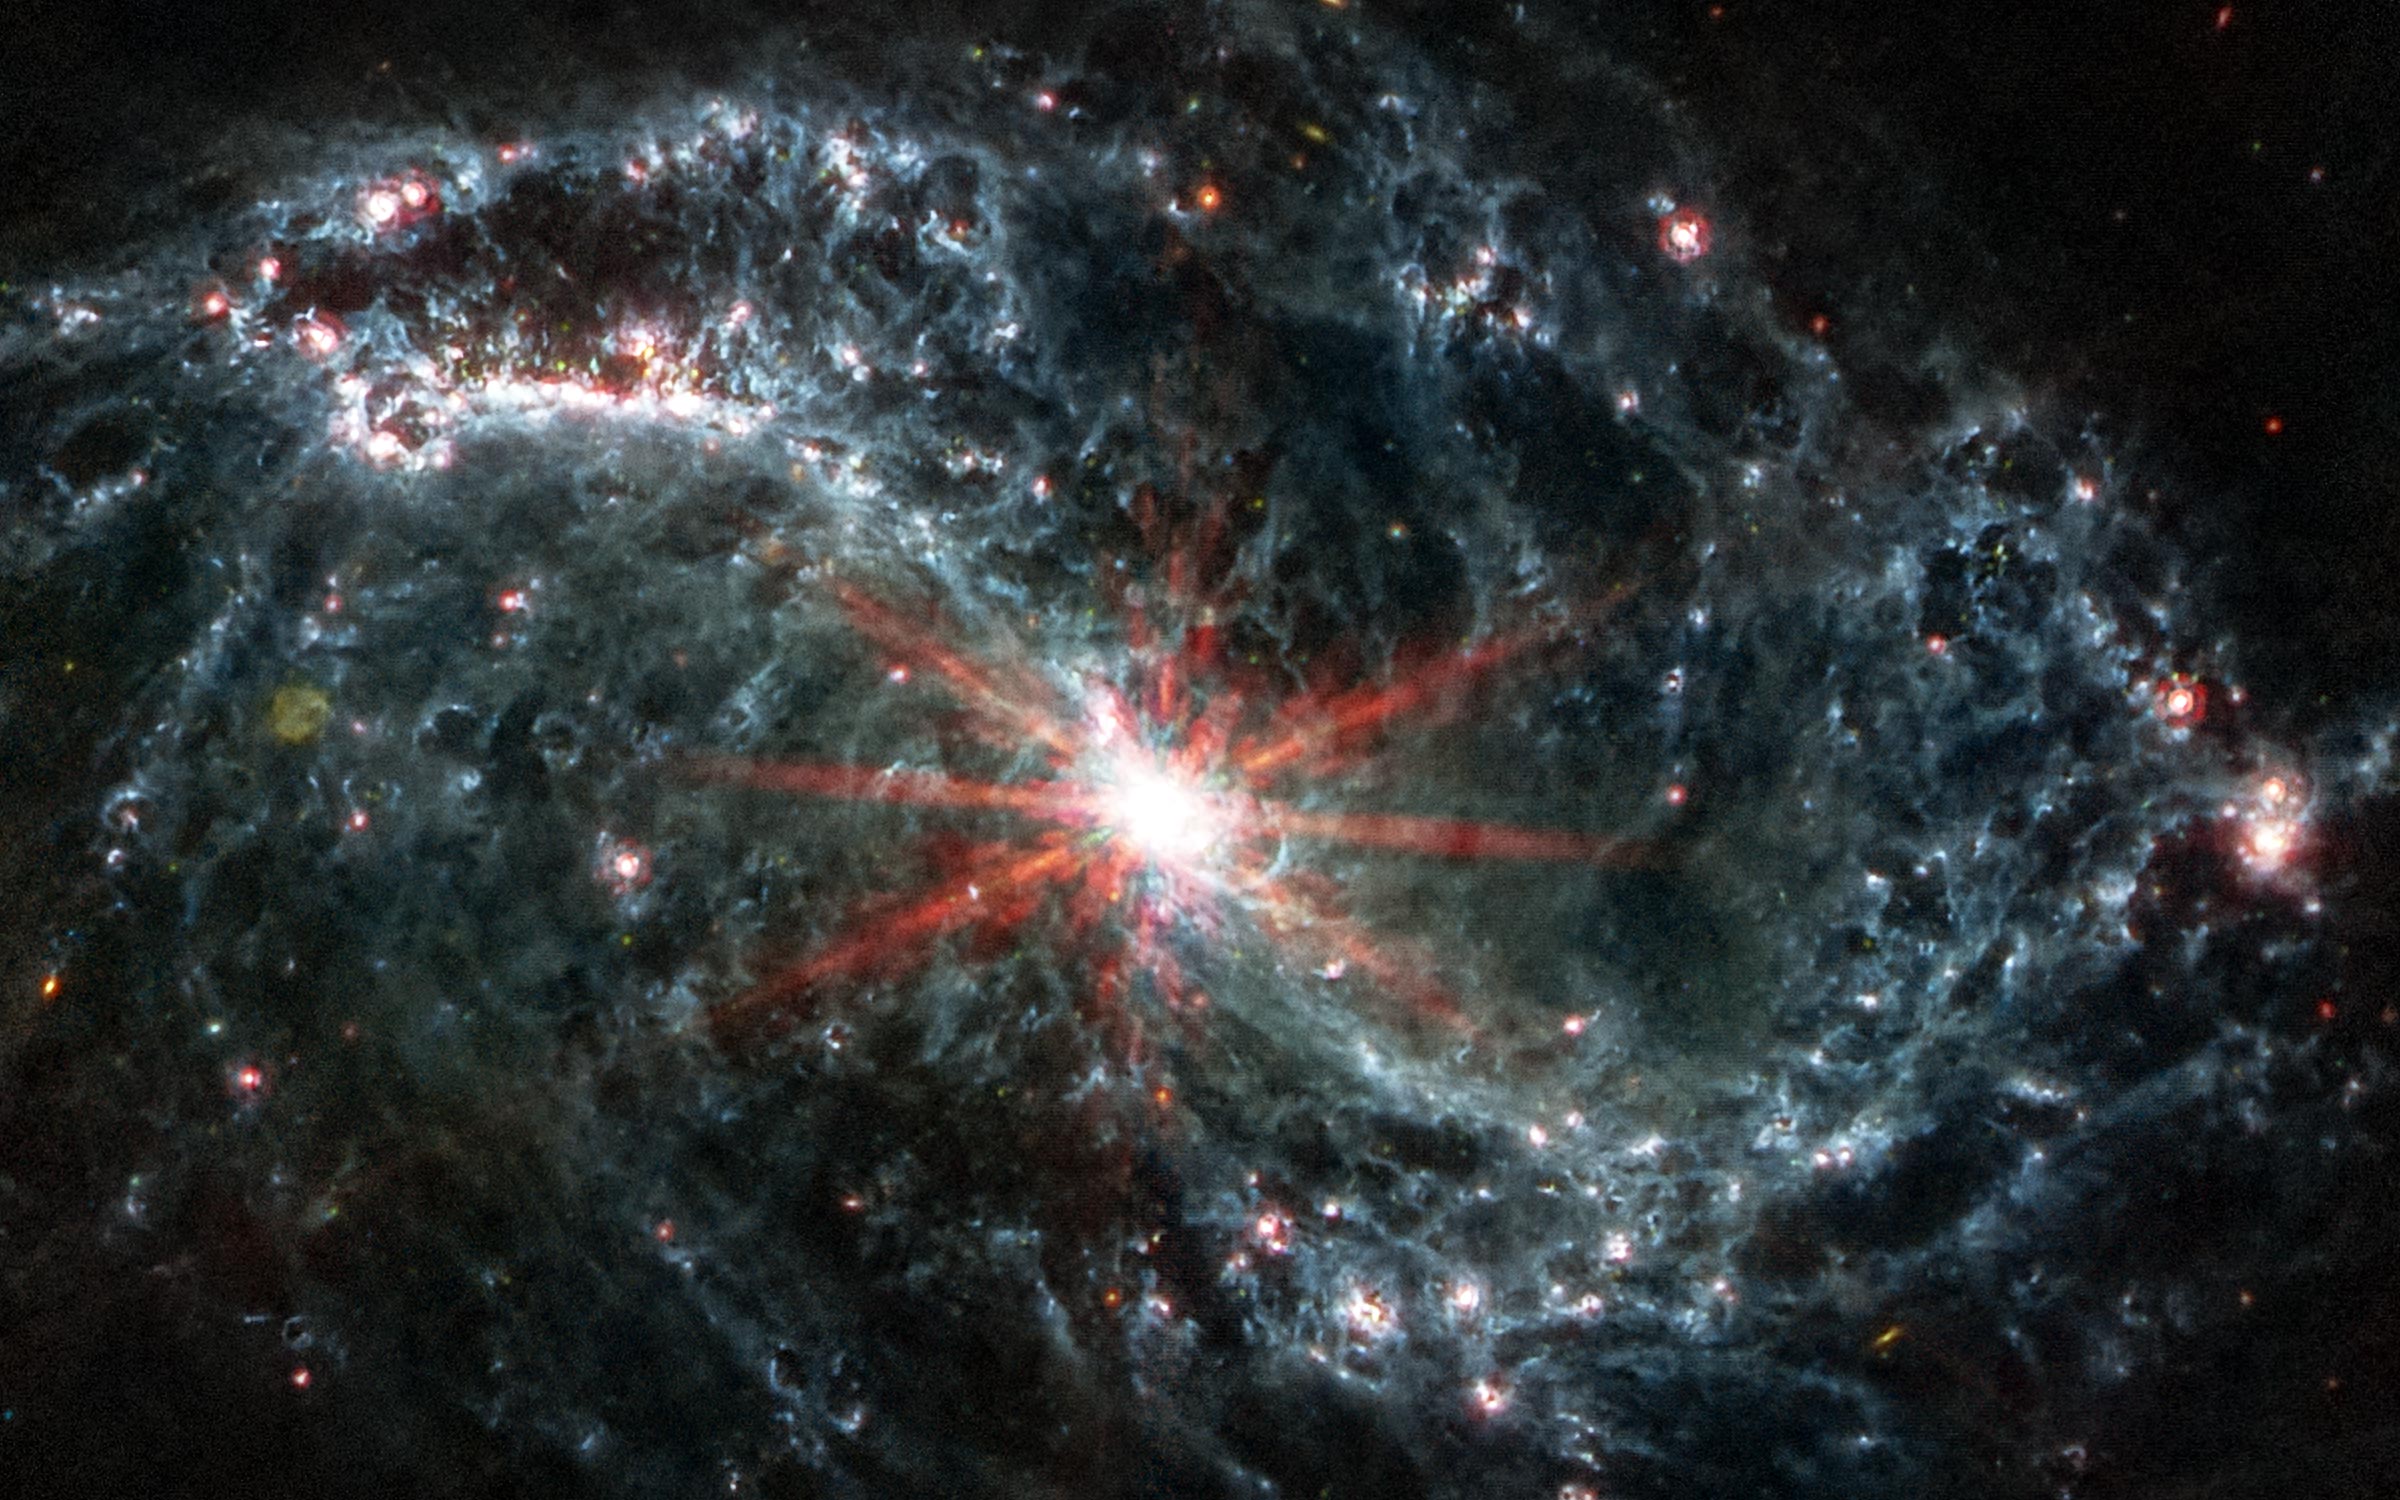 Breathtaking early stages of star formation captured by the James Webb Space Telescope